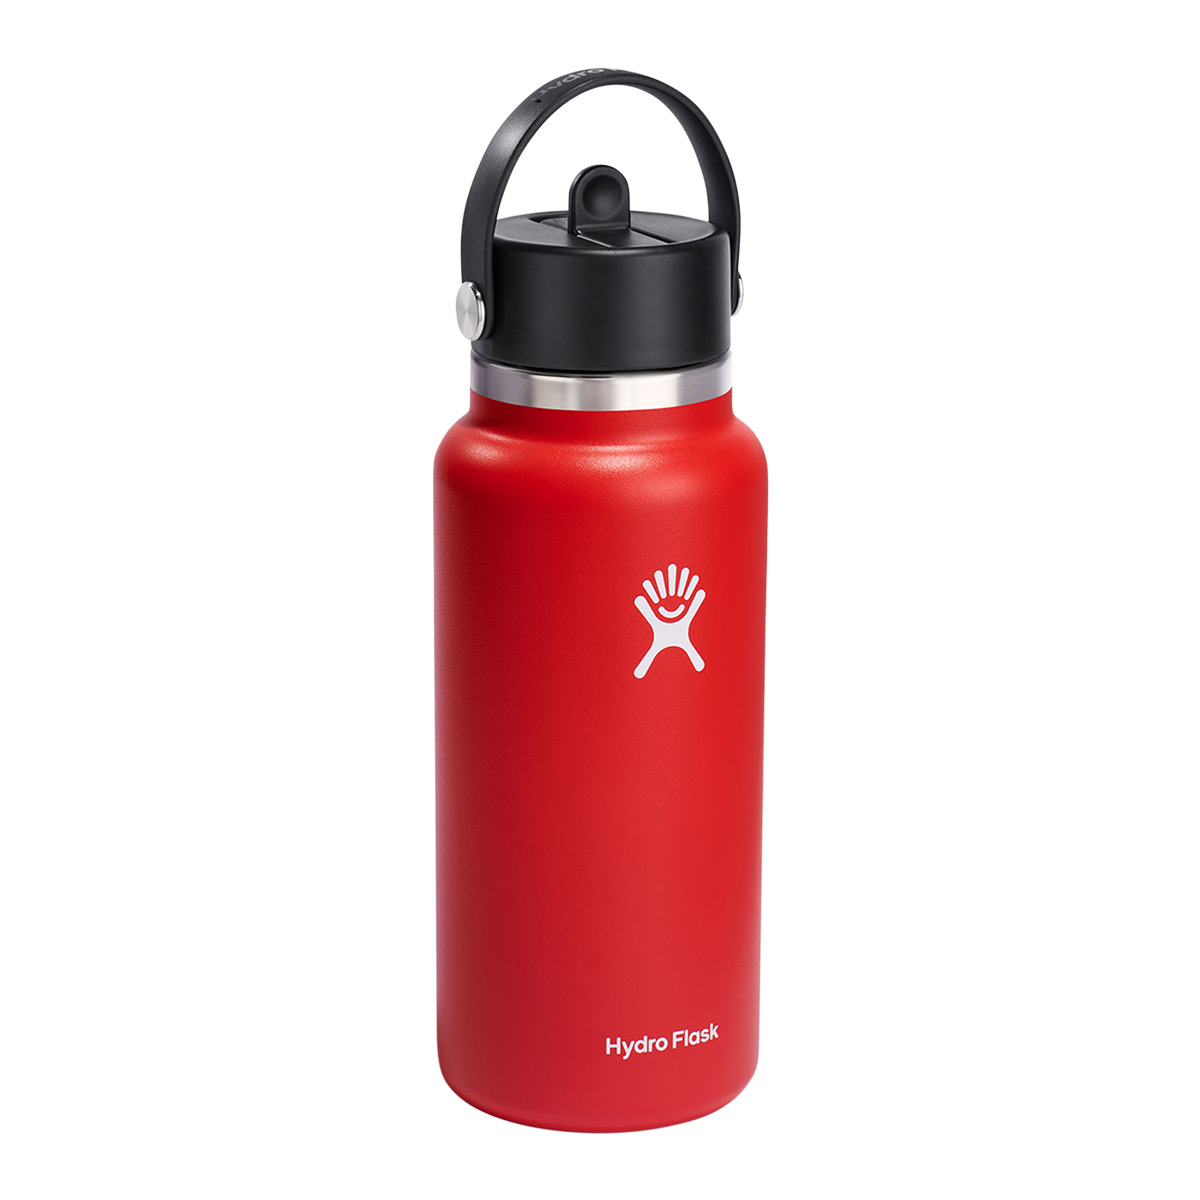 Hydro Flask's new Travel tumblers are back in stock — for now 